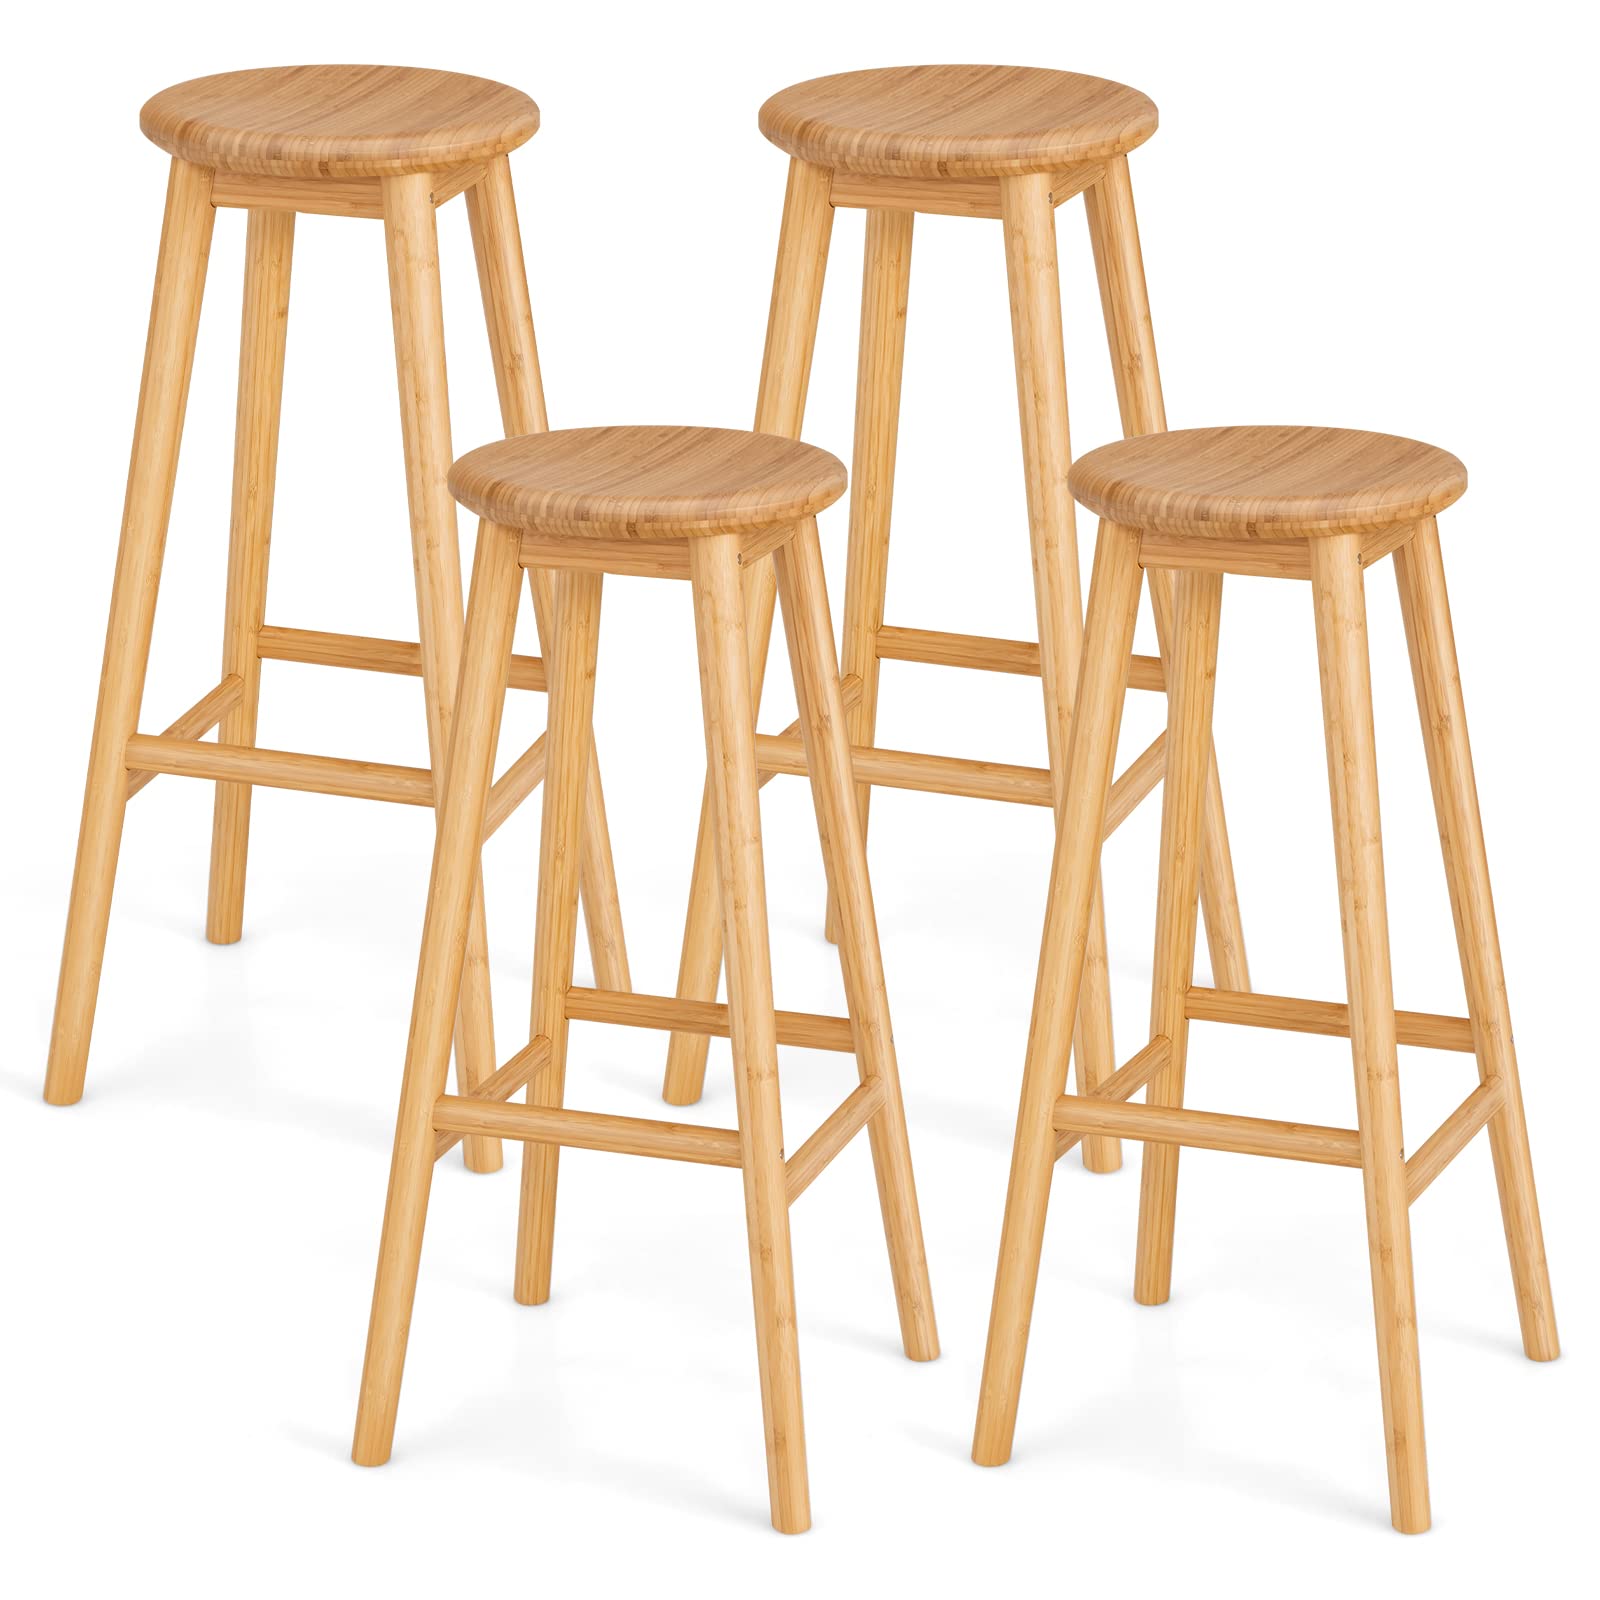 Giantex Bamboo Bar Stools, 31-Inch Height Round Seat Breakfast Dining Chairs with Footrest